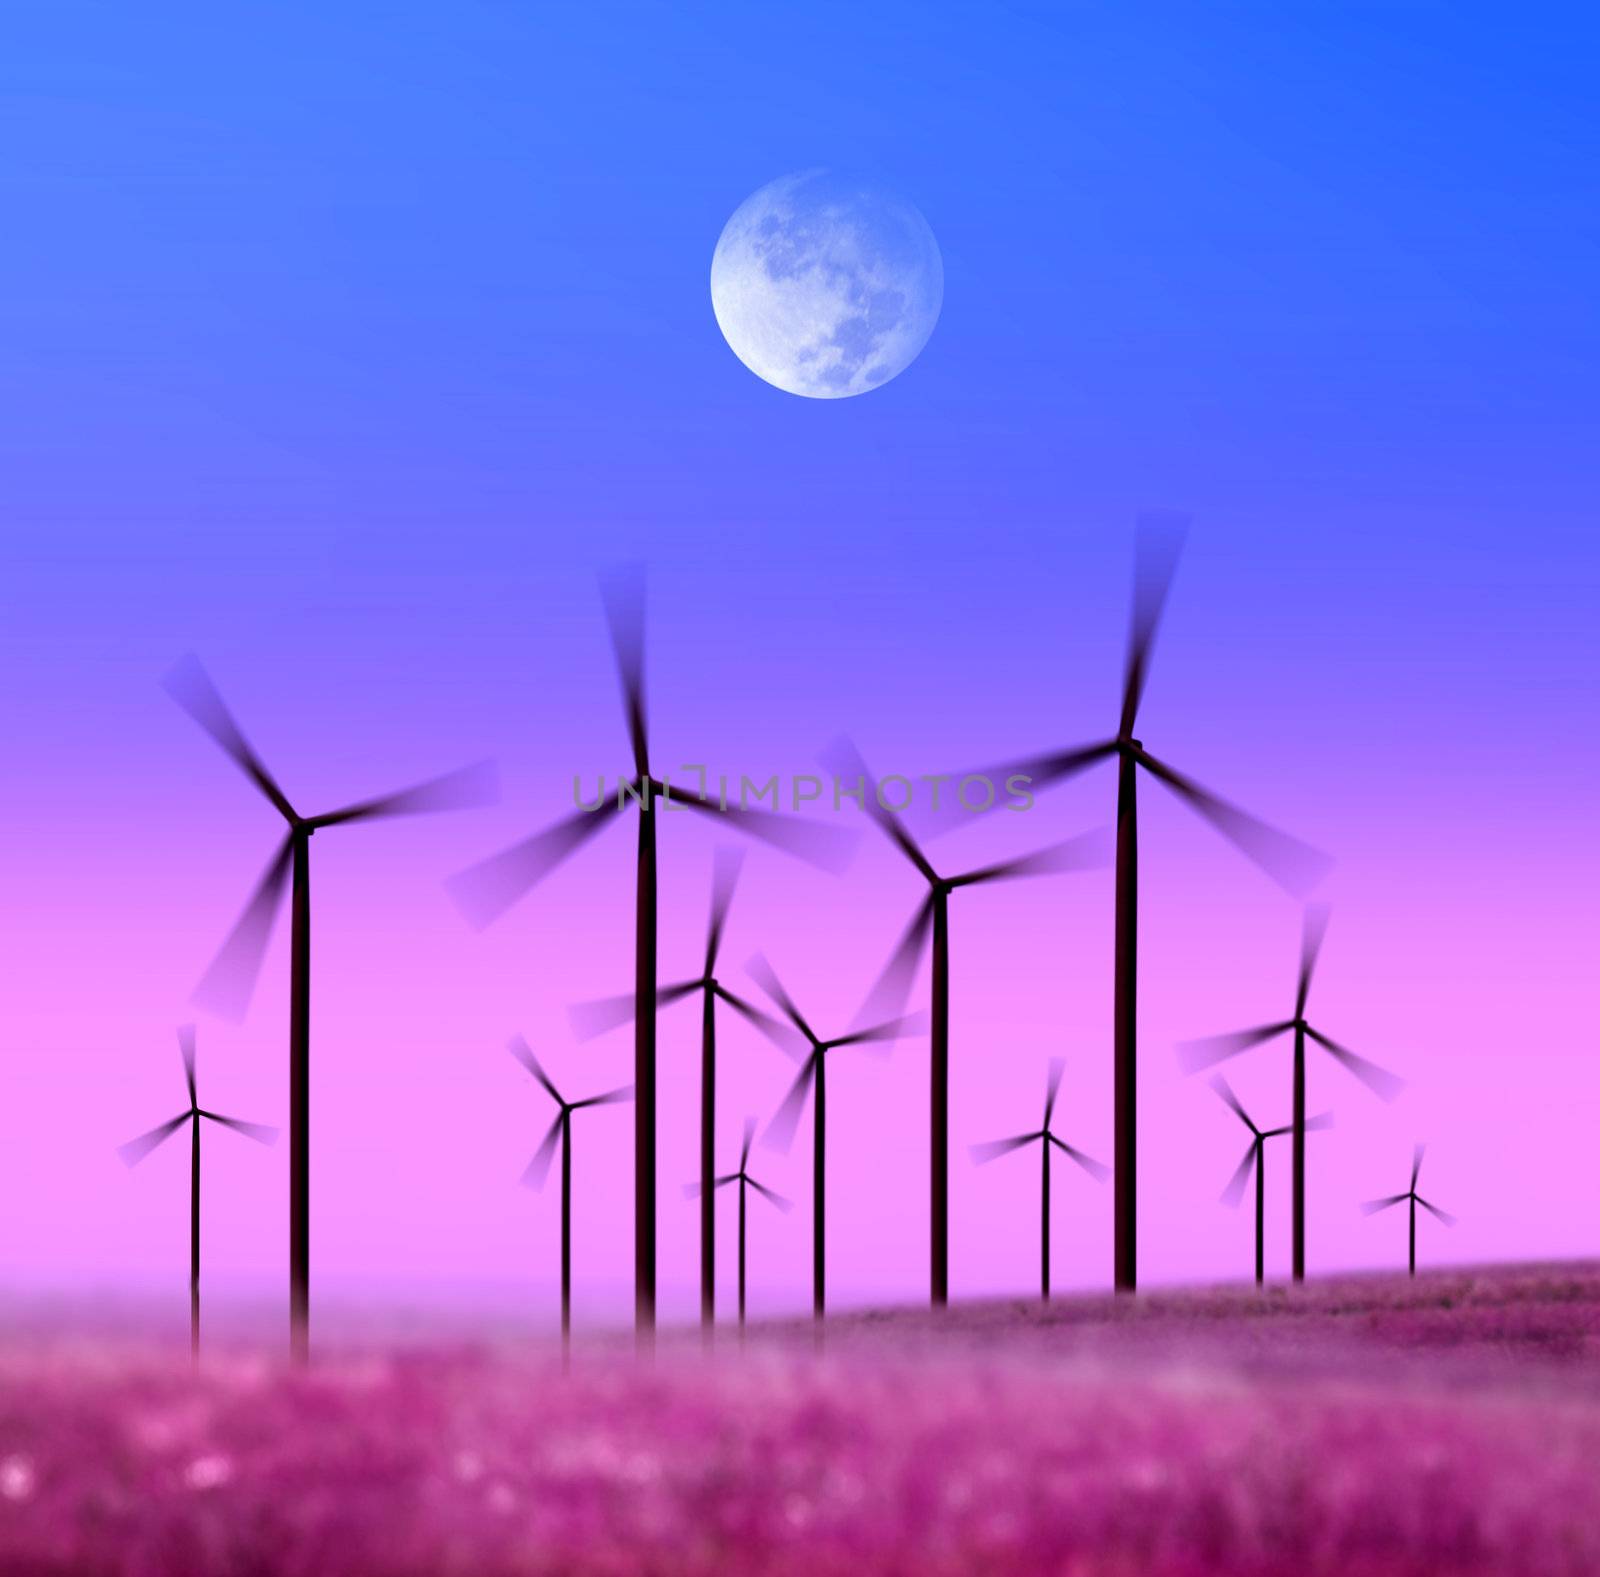 silhouette of wind turbines generating electricity on night sky